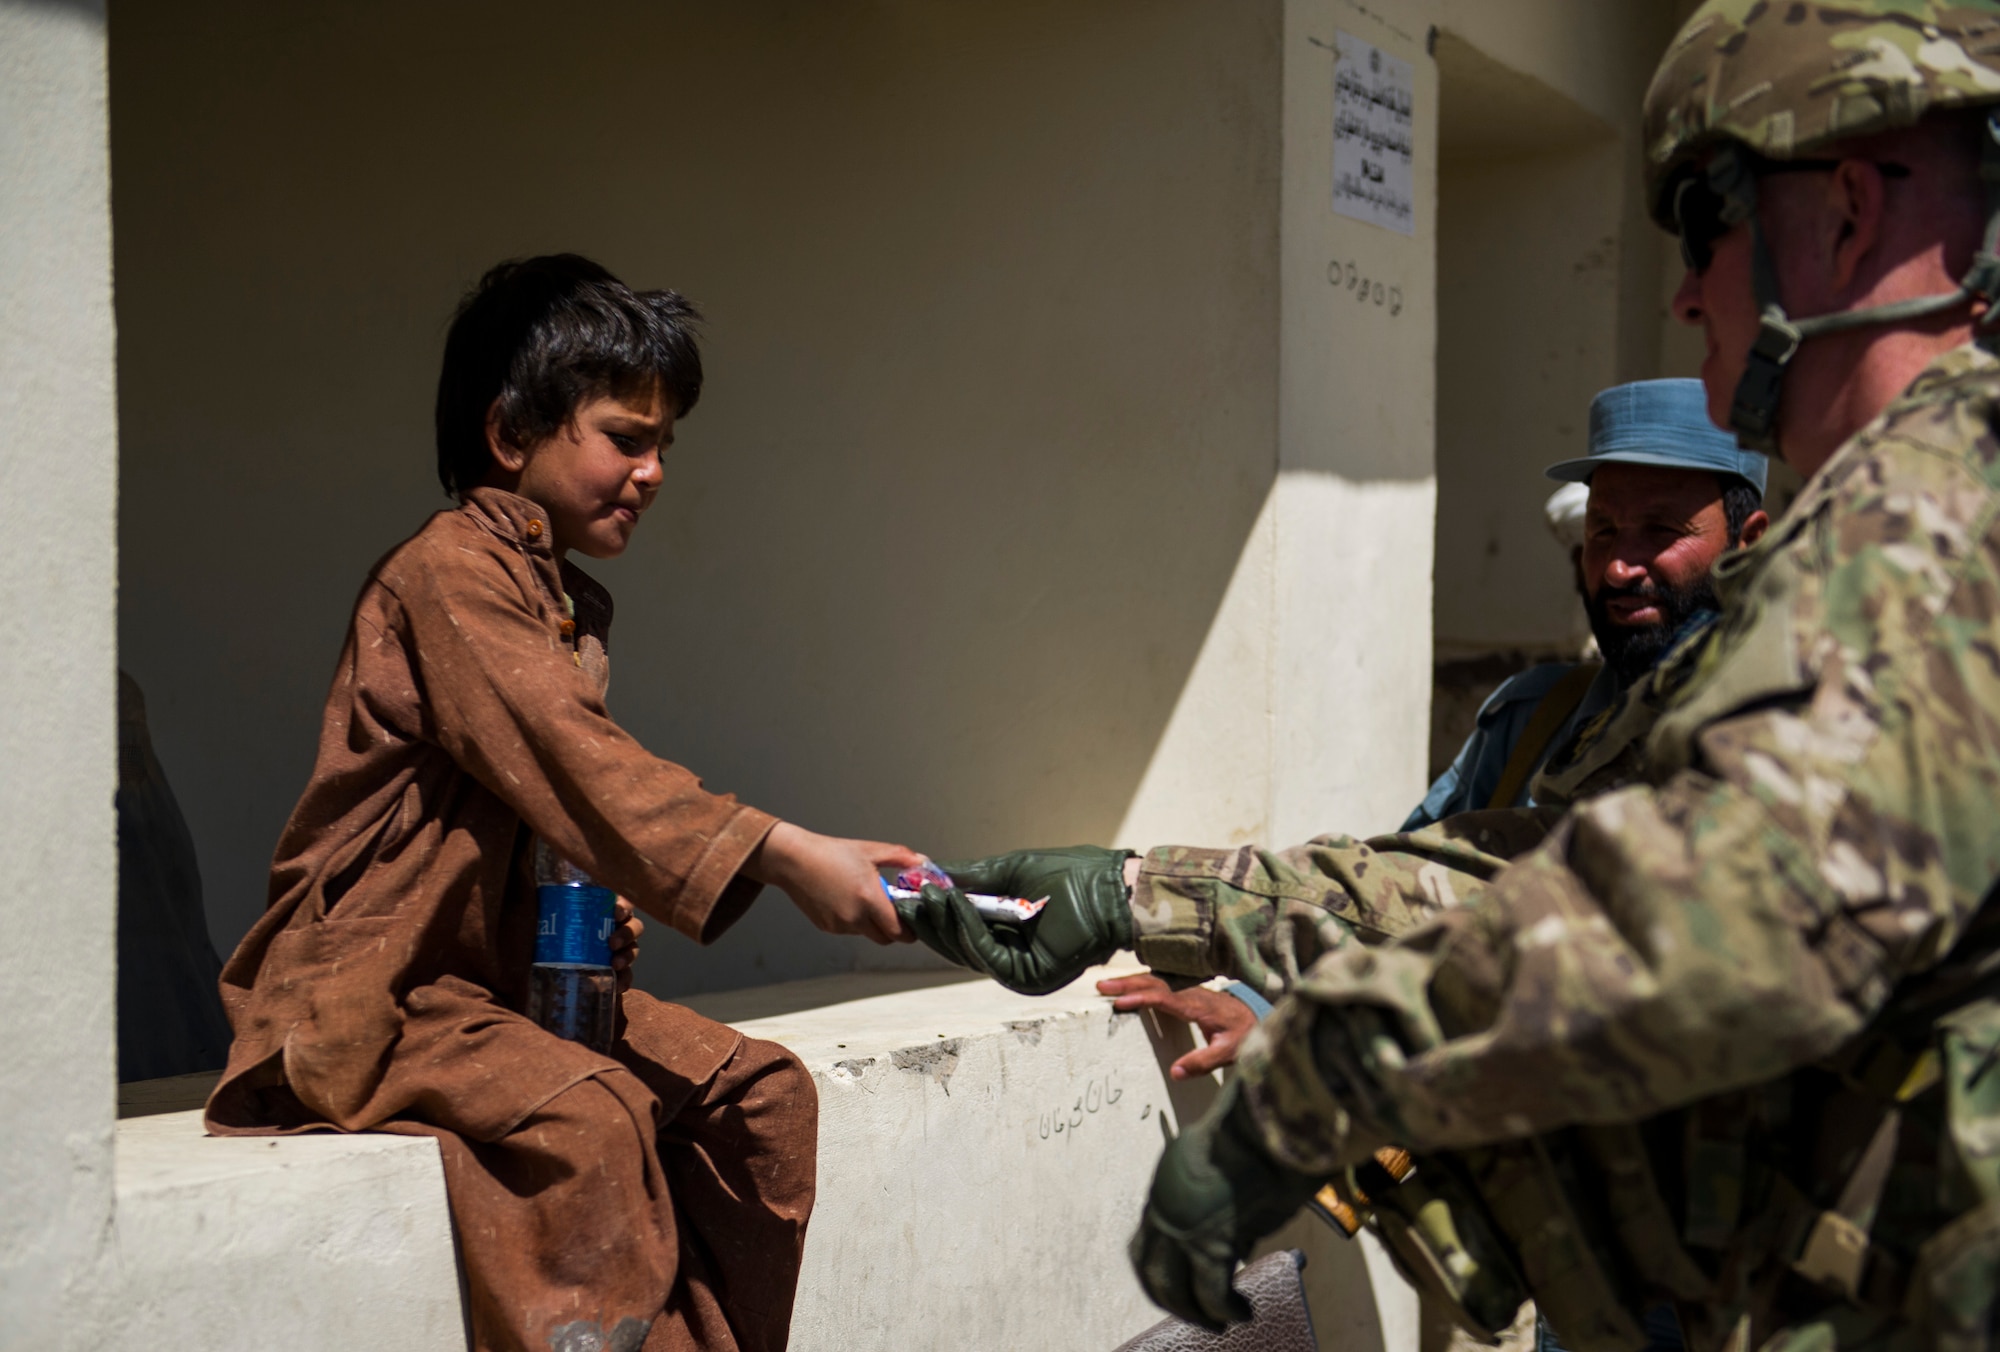 Tech. Sgt. Michael Herrell shares candy with a local Afghan child during a mission, April 17, 2013, in Panjwai, Afghanistan. Herrell, a Kentucky Air National Guard finance specialist, is deployed as a Joint Expeditionary Tasked Airman with the 466th Air Expeditionary Squadron and is working as a Kentucky National Guard Agribusiness Development Team Agriculture team specialist. (U.S. Air Force photo/Staff Sgt. Marleah Miller)